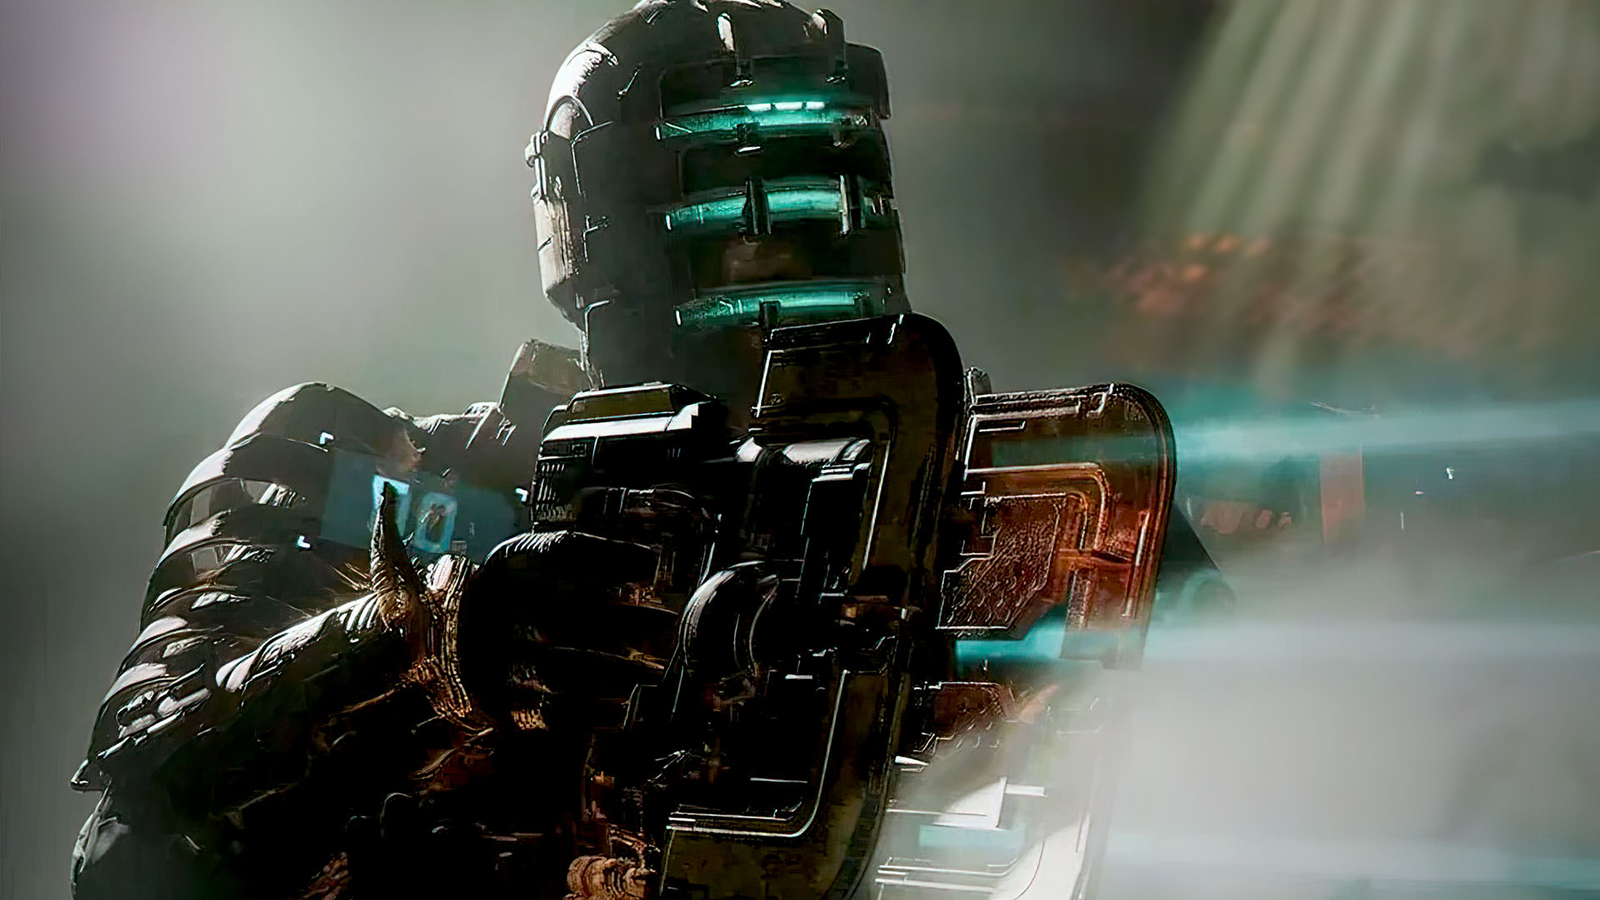 Steam now offering timed trials for games, starting with Dead Space